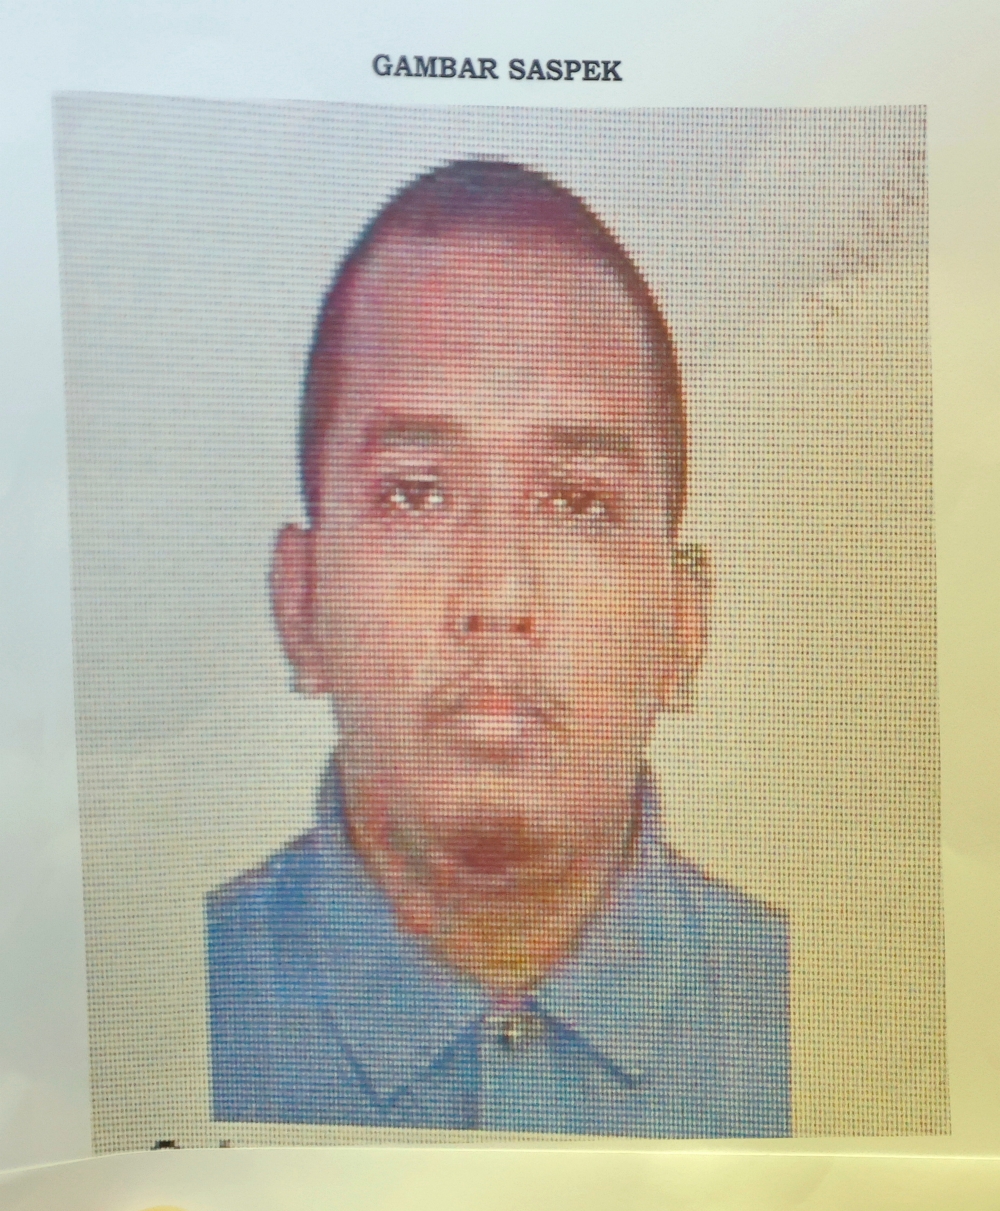 Hafizul Harawi, 38, attempted to kill his wife by firing his gun at the arrival hall in KLIA last Sunday morning. — Bernama pic